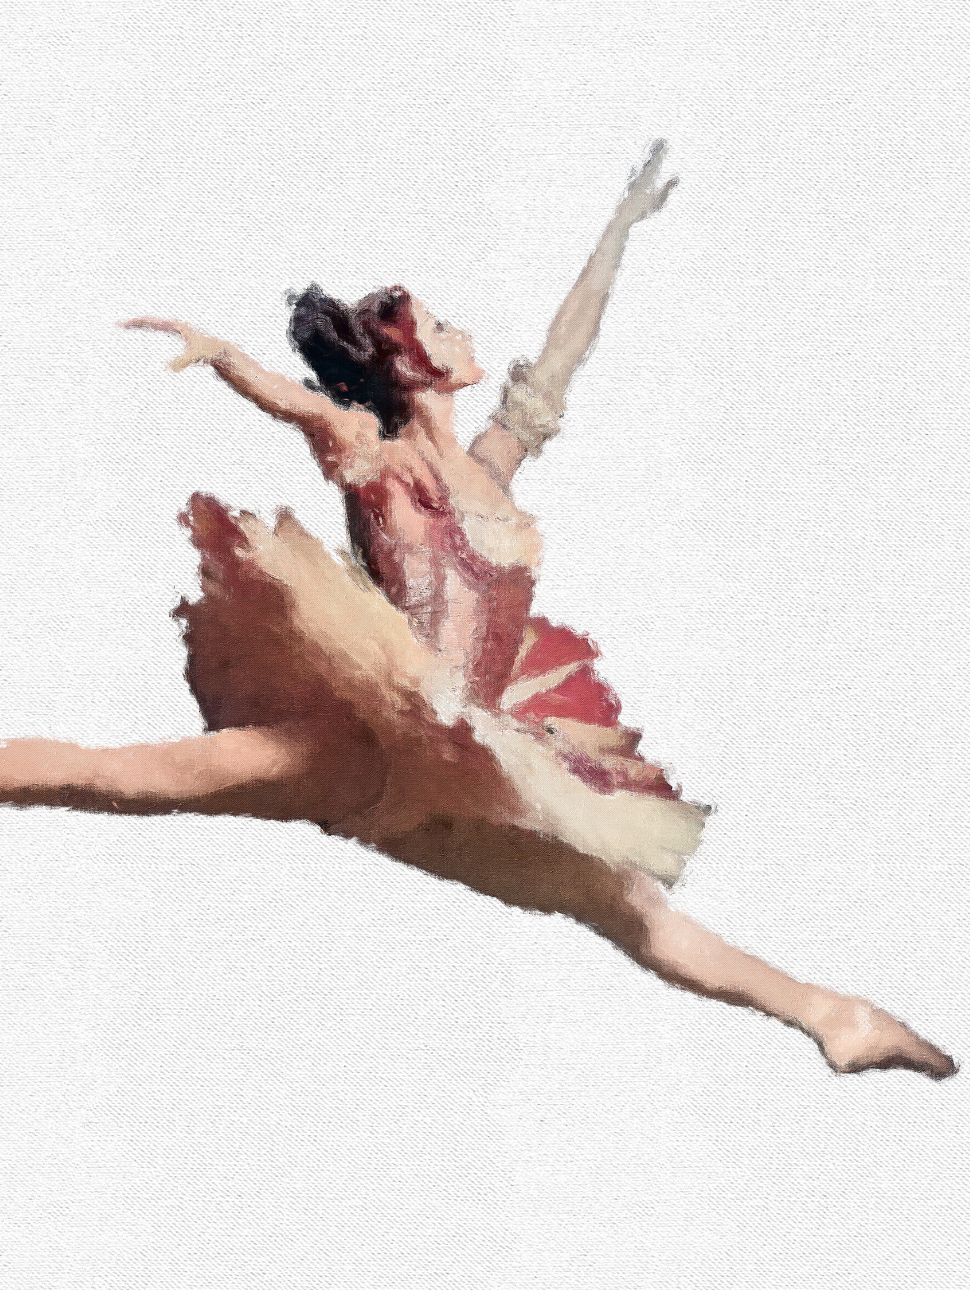 Watercolour artwork of a ballerina created for the WA Stories, Prima Concert